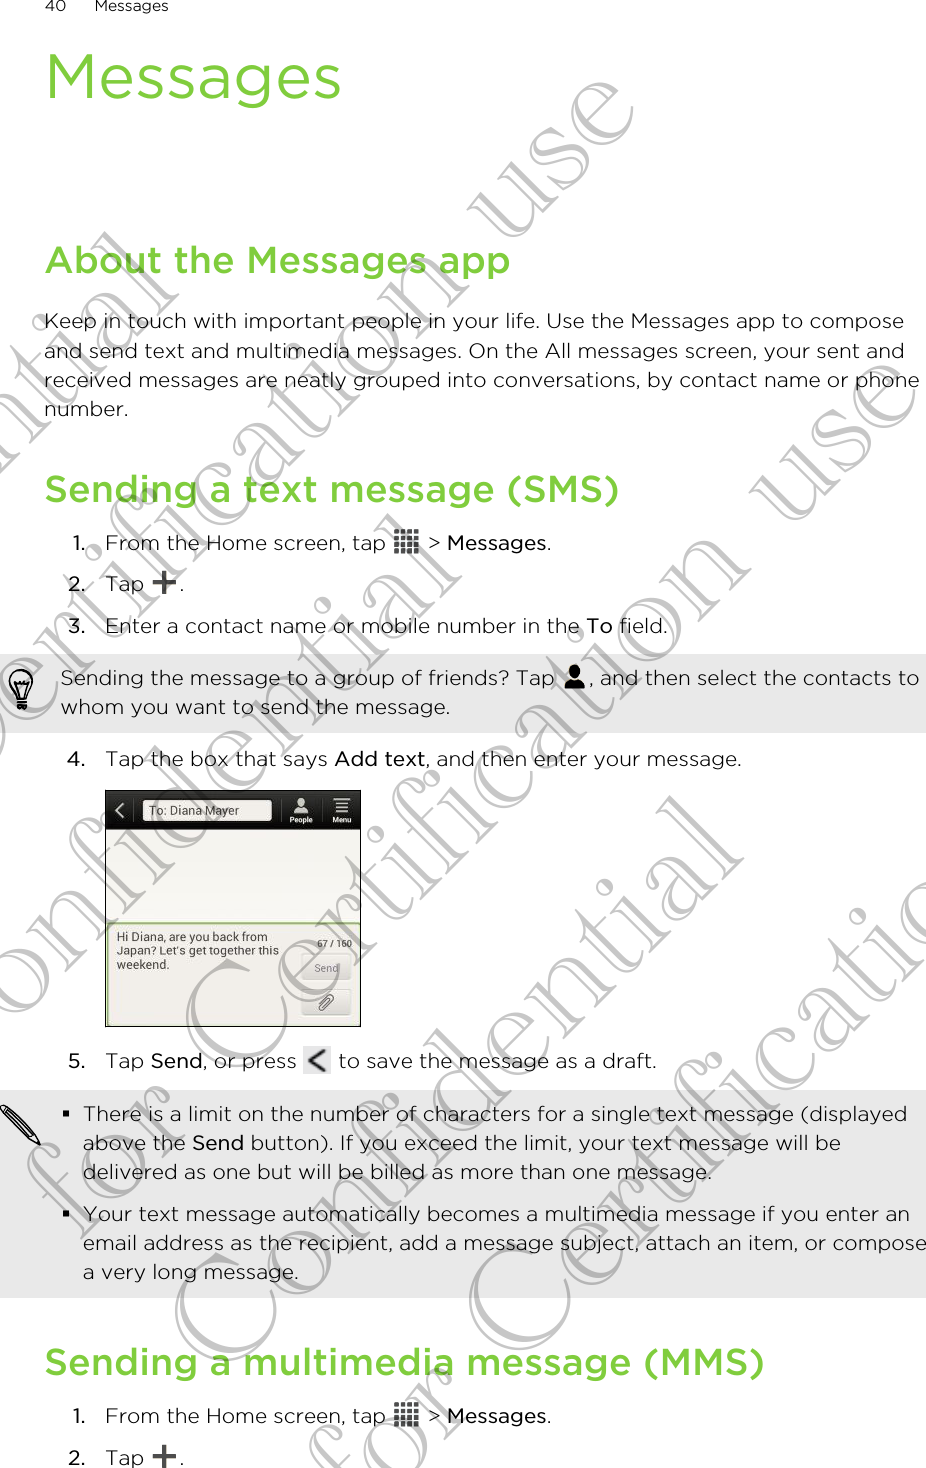 MessagesAbout the Messages appKeep in touch with important people in your life. Use the Messages app to composeand send text and multimedia messages. On the All messages screen, your sent andreceived messages are neatly grouped into conversations, by contact name or phonenumber.Sending a text message (SMS)1. From the Home screen, tap   &gt; Messages.2. Tap  .3. Enter a contact name or mobile number in the To field. Sending the message to a group of friends? Tap  , and then select the contacts towhom you want to send the message.4. Tap the box that says Add text, and then enter your message. 5. Tap Send, or press   to save the message as a draft. §There is a limit on the number of characters for a single text message (displayedabove the Send button). If you exceed the limit, your text message will bedelivered as one but will be billed as more than one message.§Your text message automatically becomes a multimedia message if you enter anemail address as the recipient, add a message subject, attach an item, or composea very long message.Sending a multimedia message (MMS)1. From the Home screen, tap   &gt; Messages.2. Tap  .40 MessagesConfidential for Certification use Confidential for Certification use Confidential for Certification use 